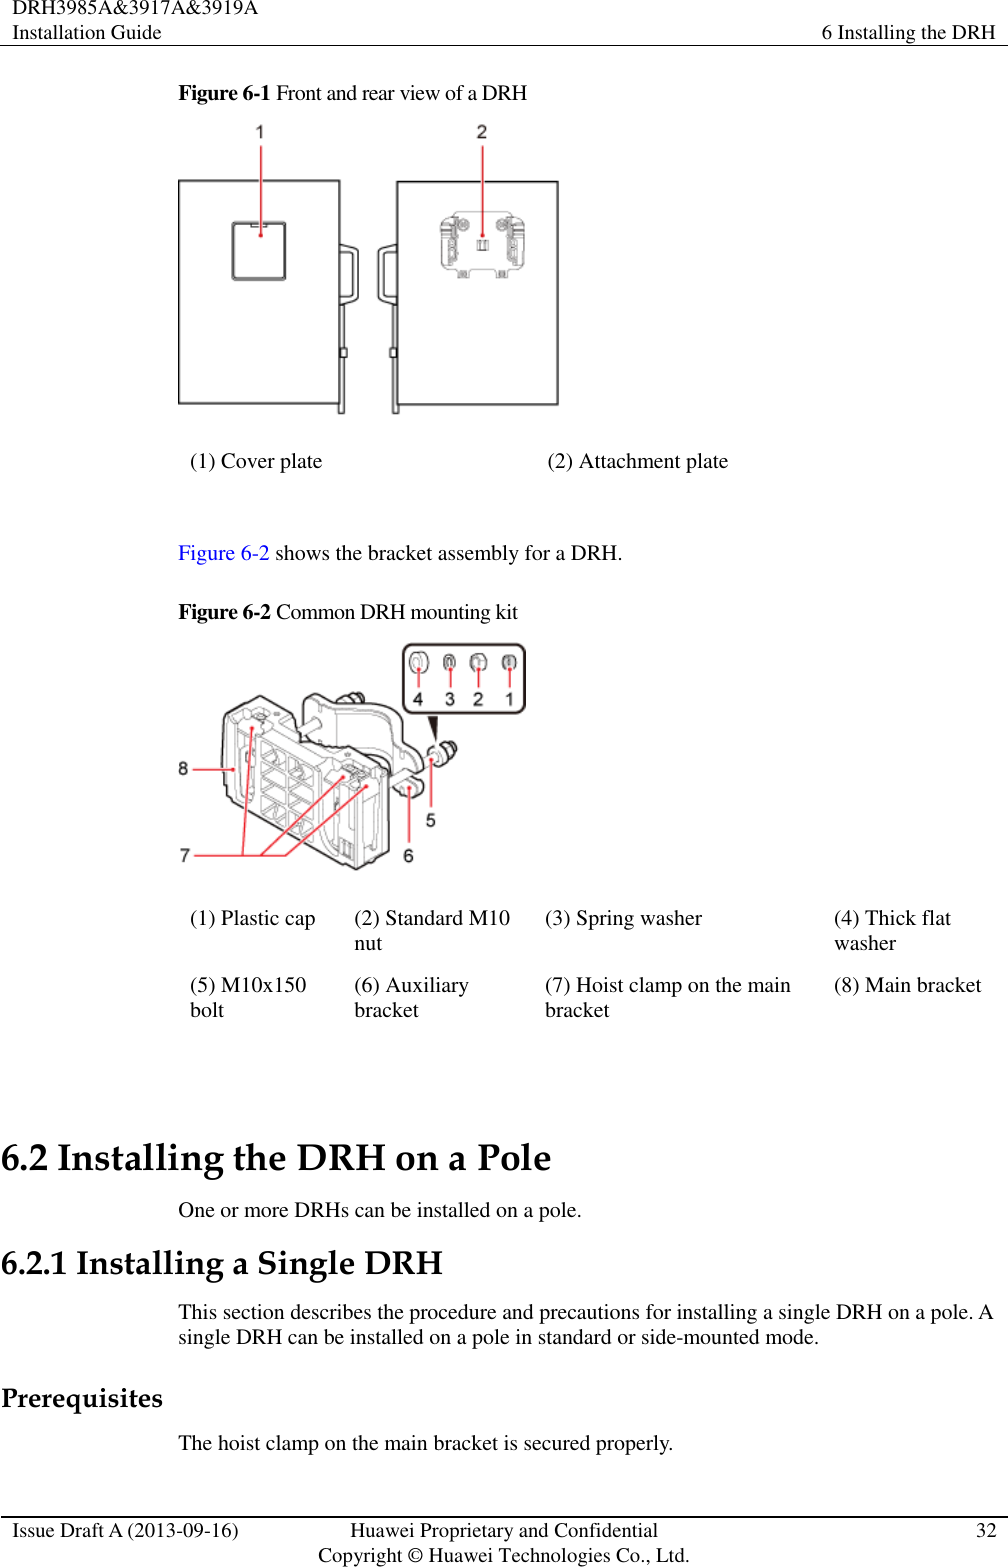 DRH3985A&amp;3917A&amp;3919A Installation Guide 6 Installing the DRH  Issue Draft A (2013-09-16) Huawei Proprietary and Confidential                                     Copyright © Huawei Technologies Co., Ltd. 32  Figure 6-1 Front and rear view of a DRH  (1) Cover plate (2) Attachment plate  Figure 6-2 shows the bracket assembly for a DRH. Figure 6-2 Common DRH mounting kit  (1) Plastic cap (2) Standard M10 nut (3) Spring washer (4) Thick flat washer (5) M10x150 bolt (6) Auxiliary bracket (7) Hoist clamp on the main bracket (8) Main bracket  6.2 Installing the DRH on a Pole One or more DRHs can be installed on a pole. 6.2.1 Installing a Single DRH This section describes the procedure and precautions for installing a single DRH on a pole. A single DRH can be installed on a pole in standard or side-mounted mode. Prerequisites The hoist clamp on the main bracket is secured properly. 